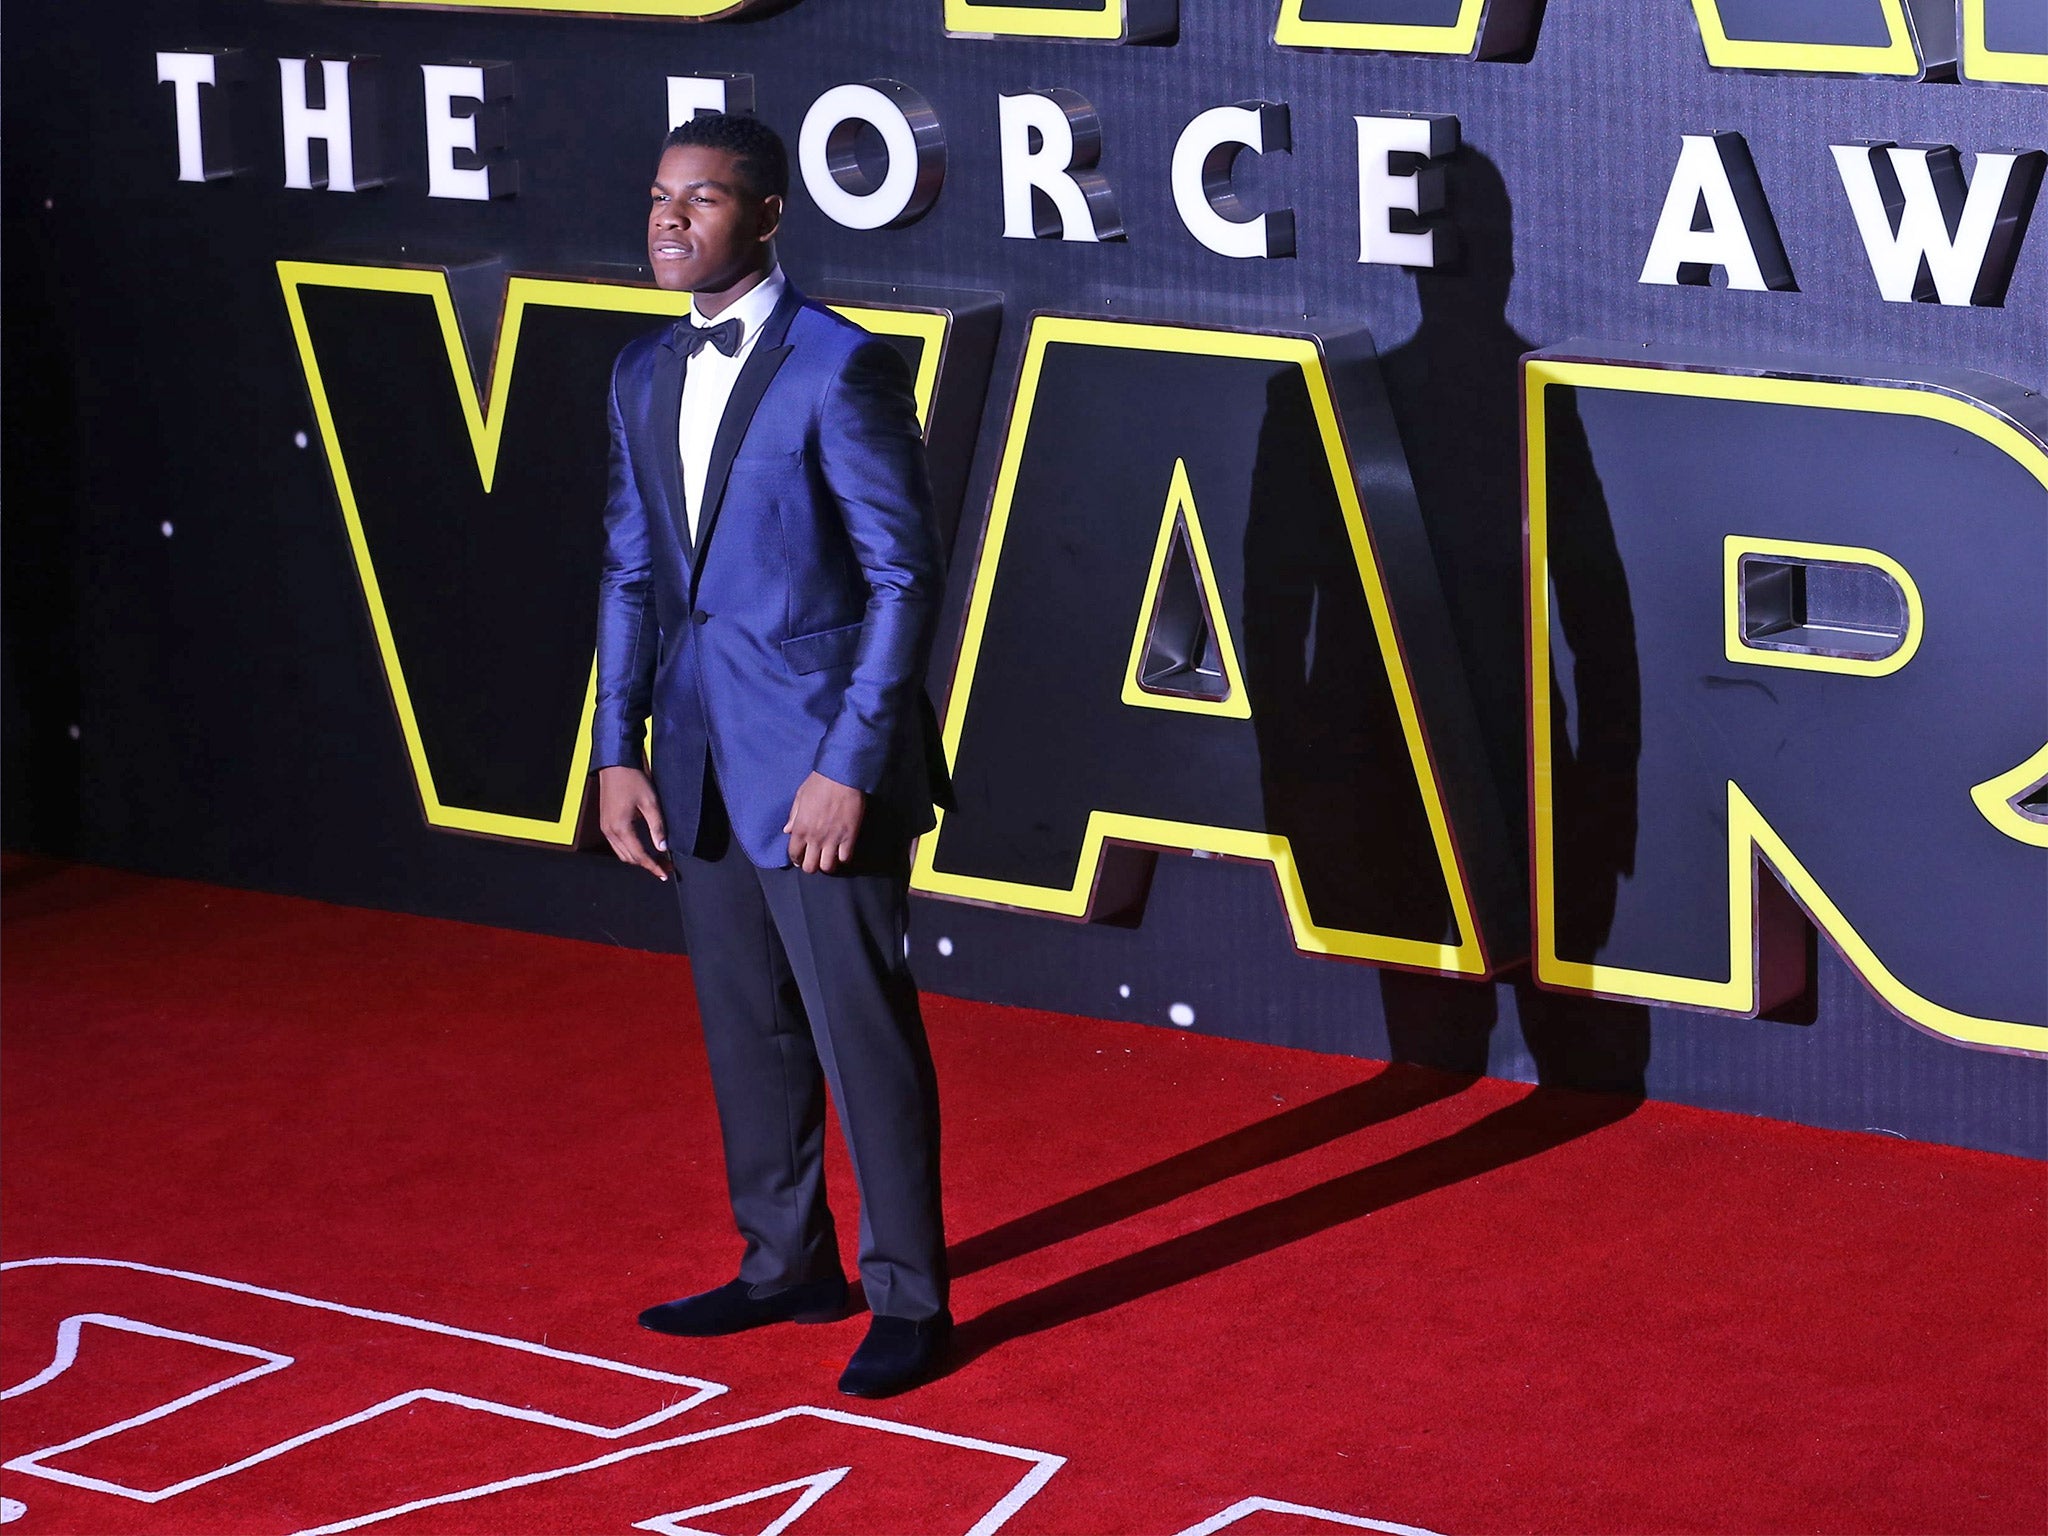 Brown and Kirby are represented by Femi Oguns of Identity Agency Group, a London stable for black actors heading to Hollywood, which also manages the Star Wars: The Force Awakens star, John Boyega.